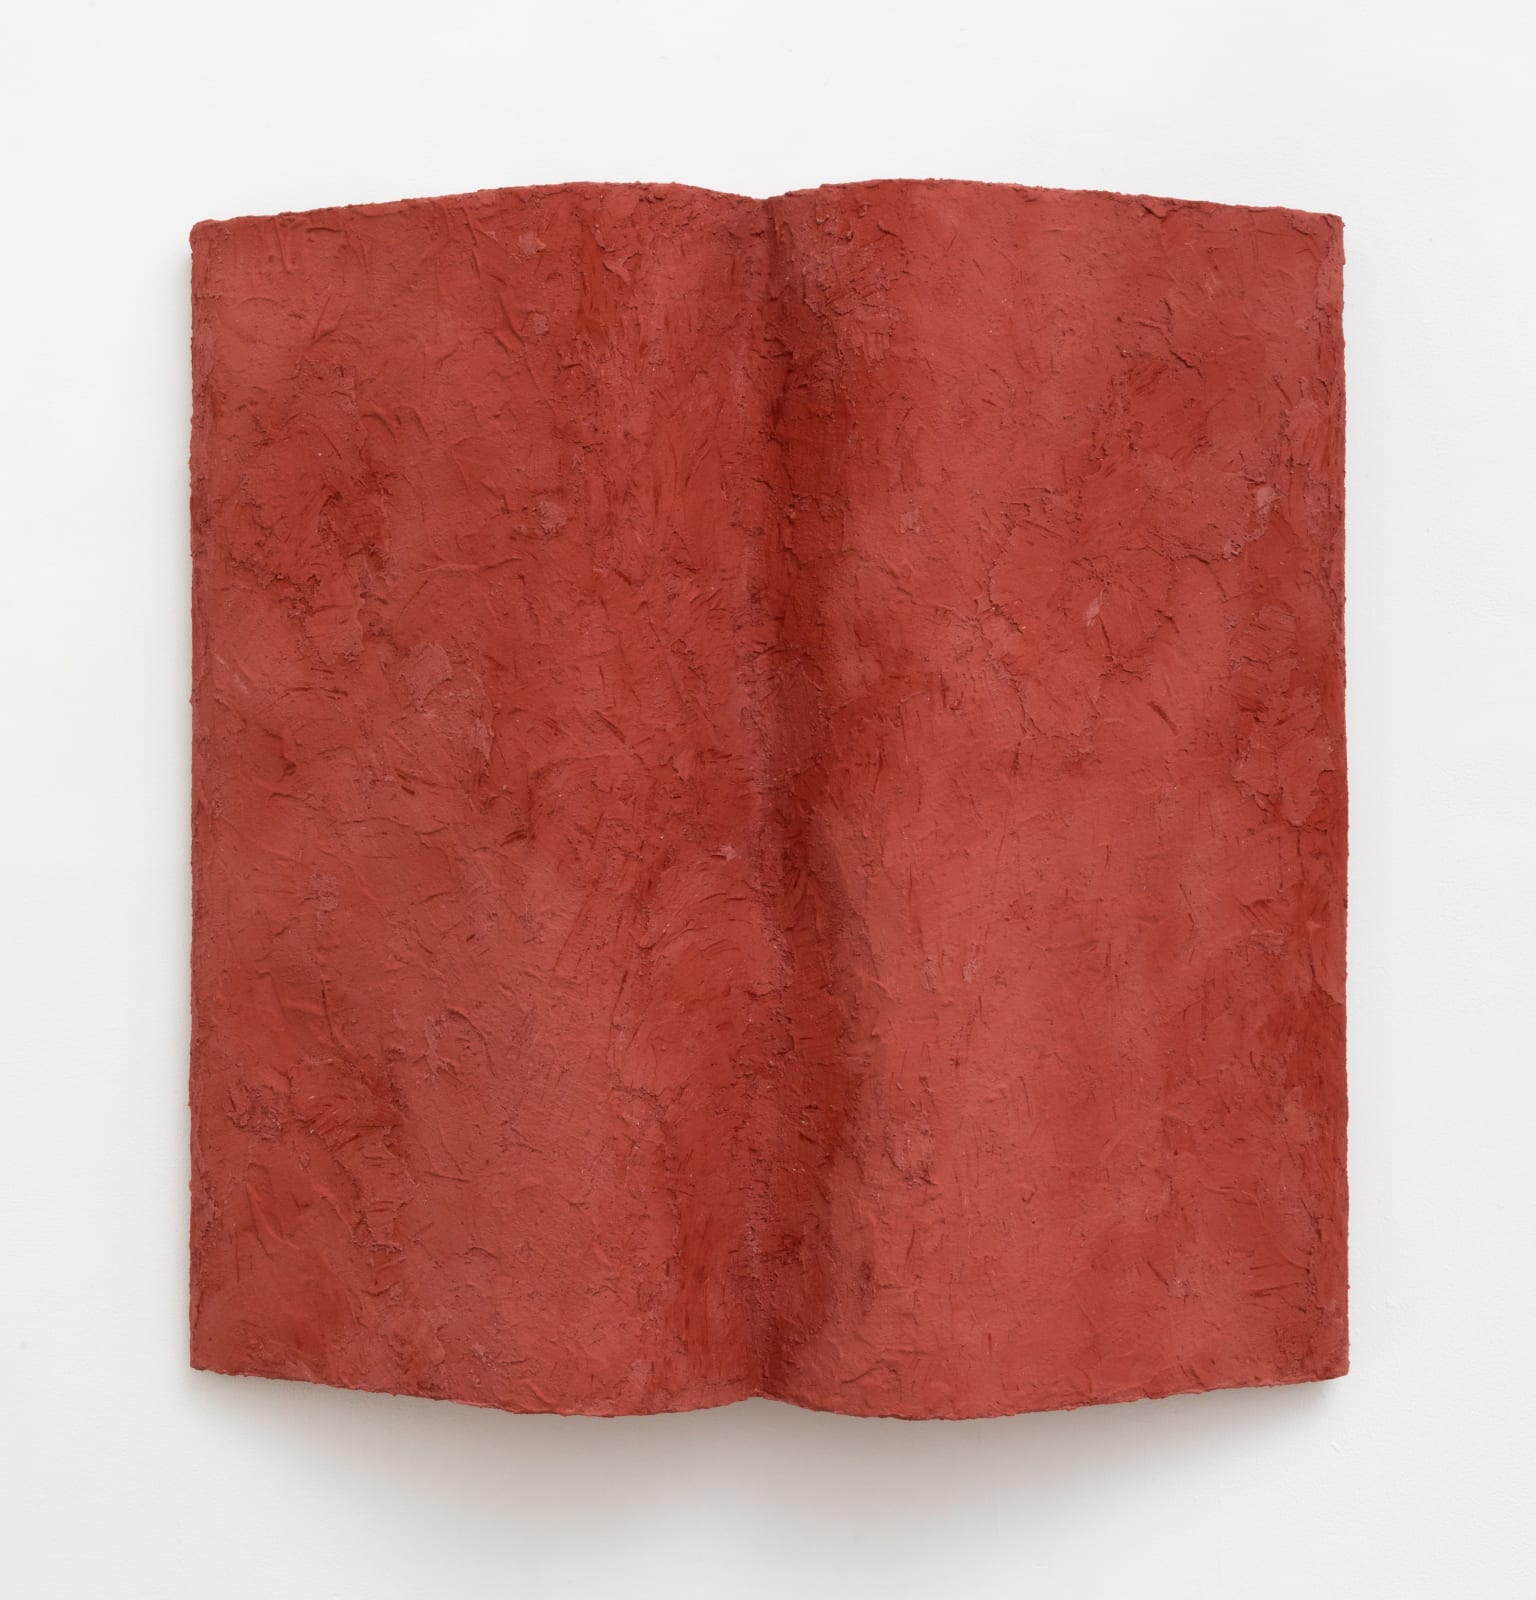 Wall-mounted sculpture in the shape of an open book that is uniformly covered with red stucco relief texture.